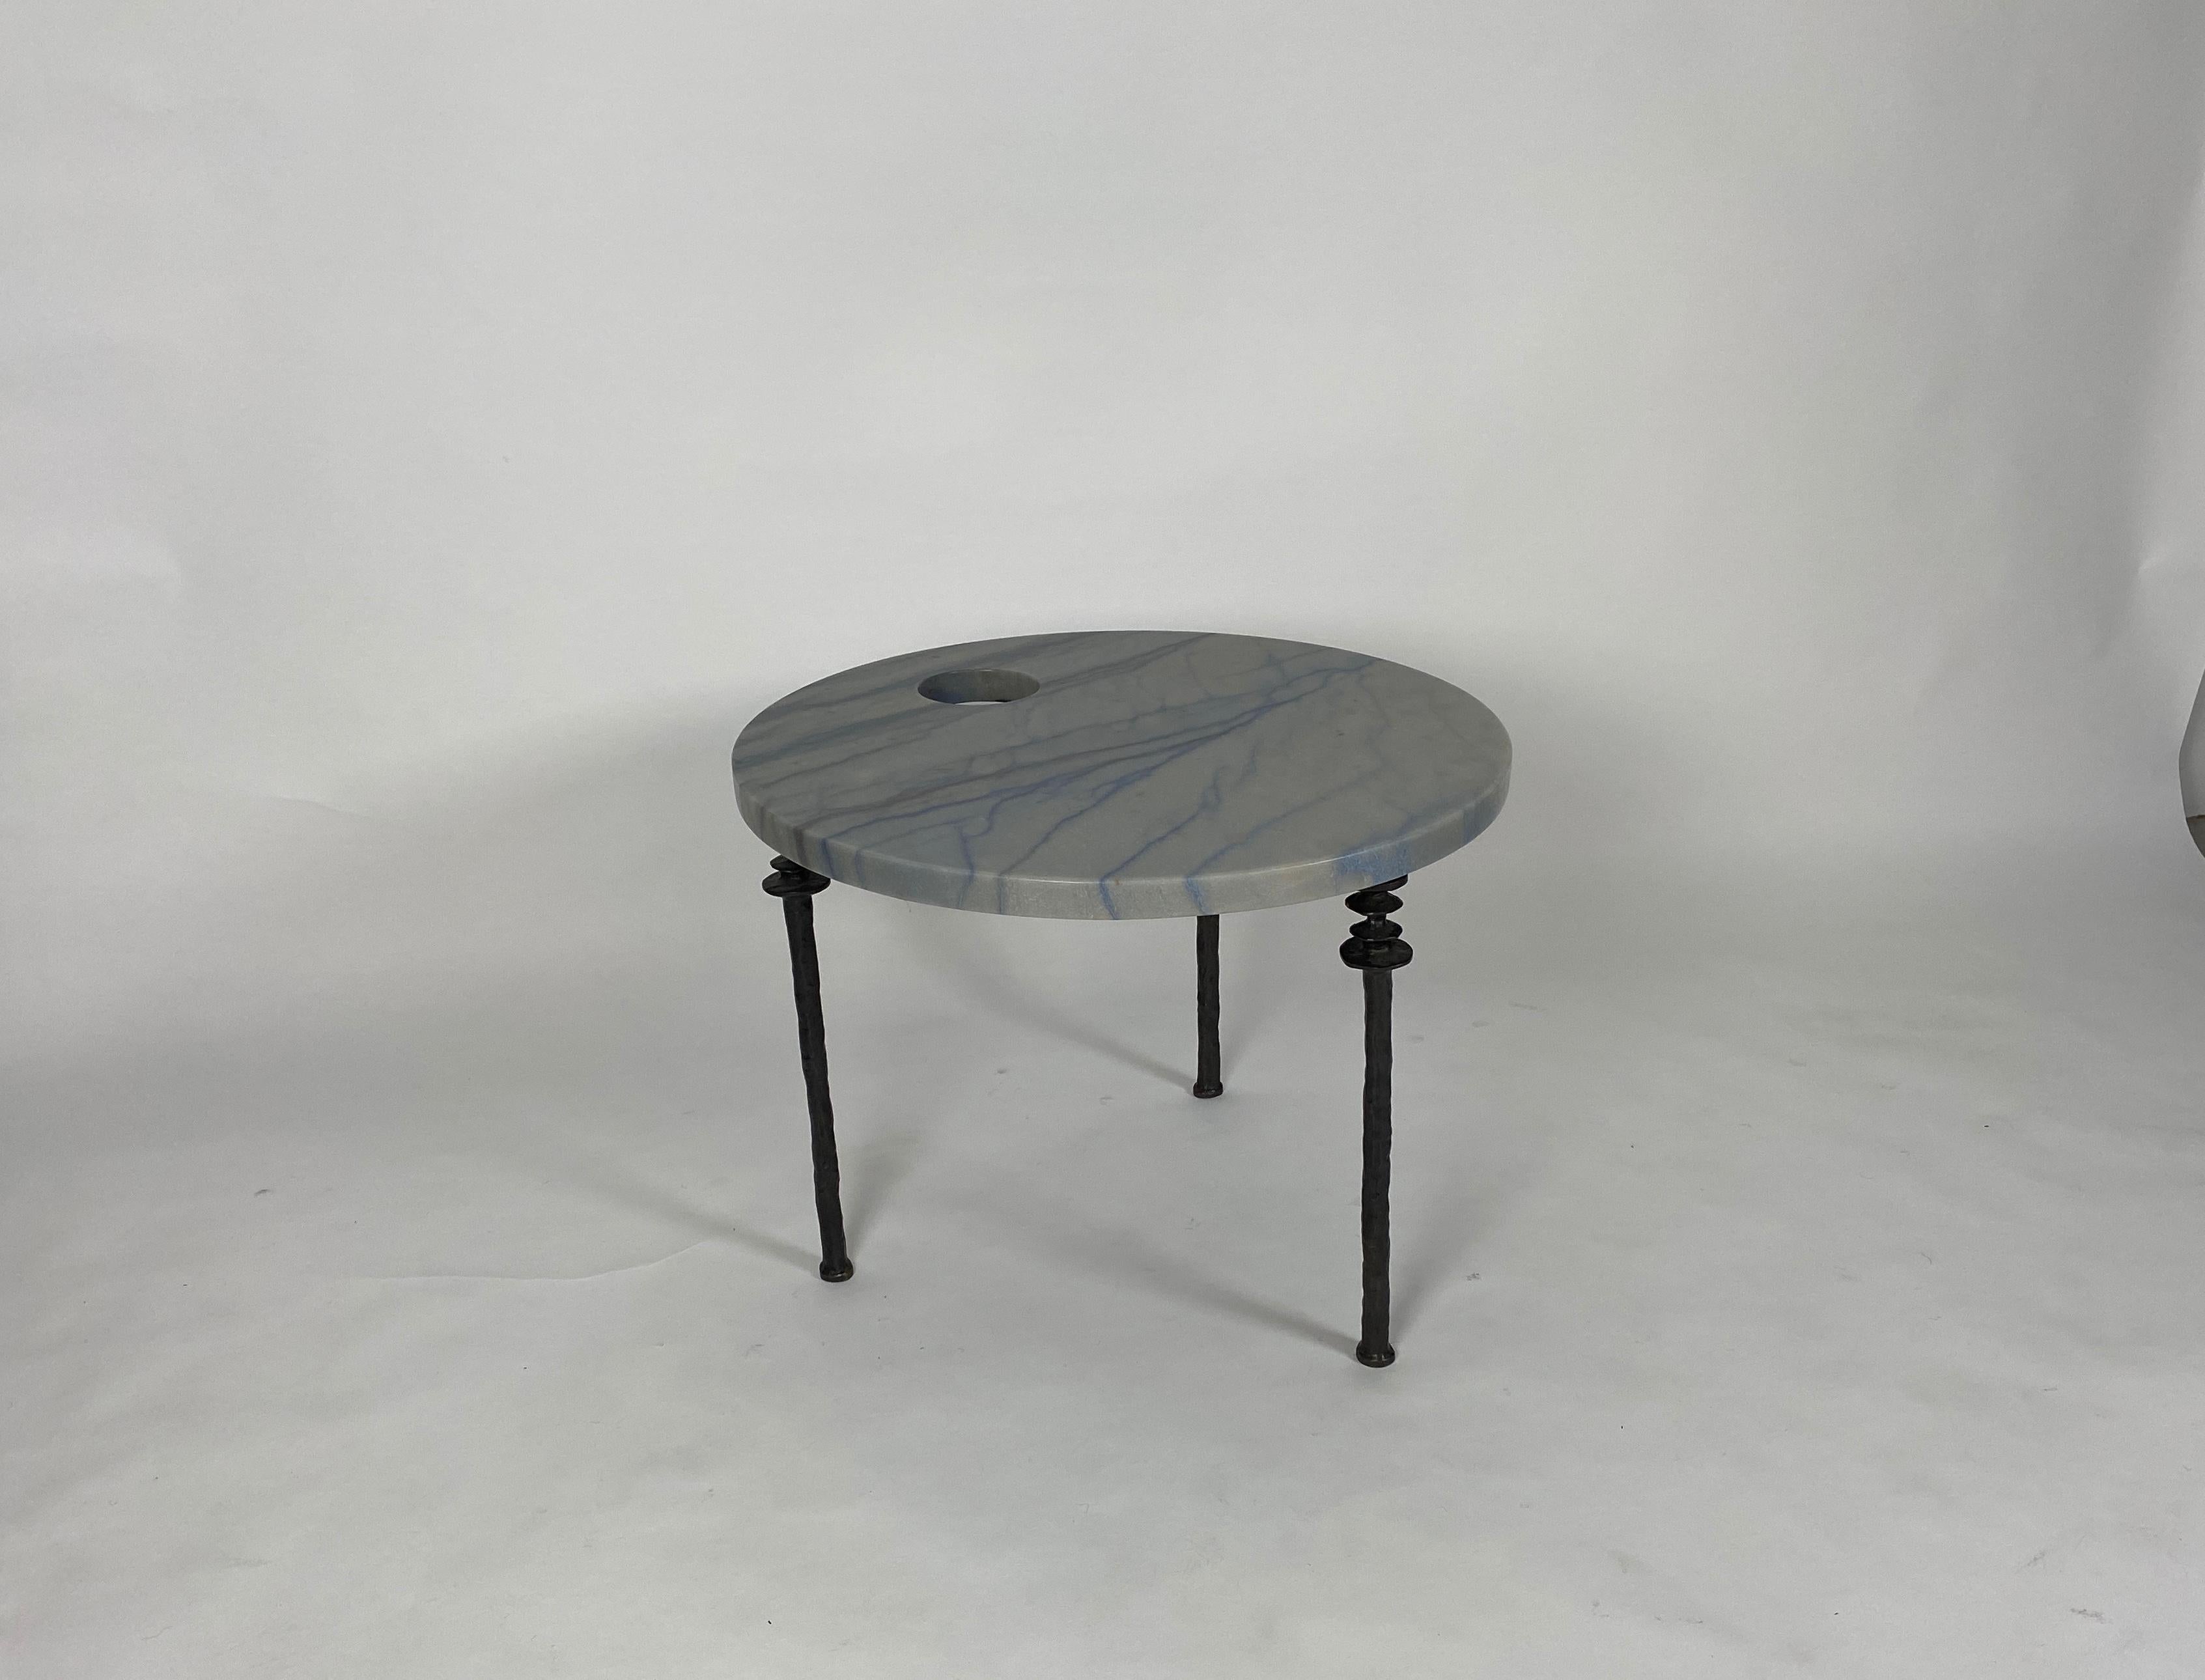 One marble-topped small scaled side tables. The round top has a single hole drilled off center in the pale blue marble top. The legs are cast silicon bronze and have a unique organic texture.
     